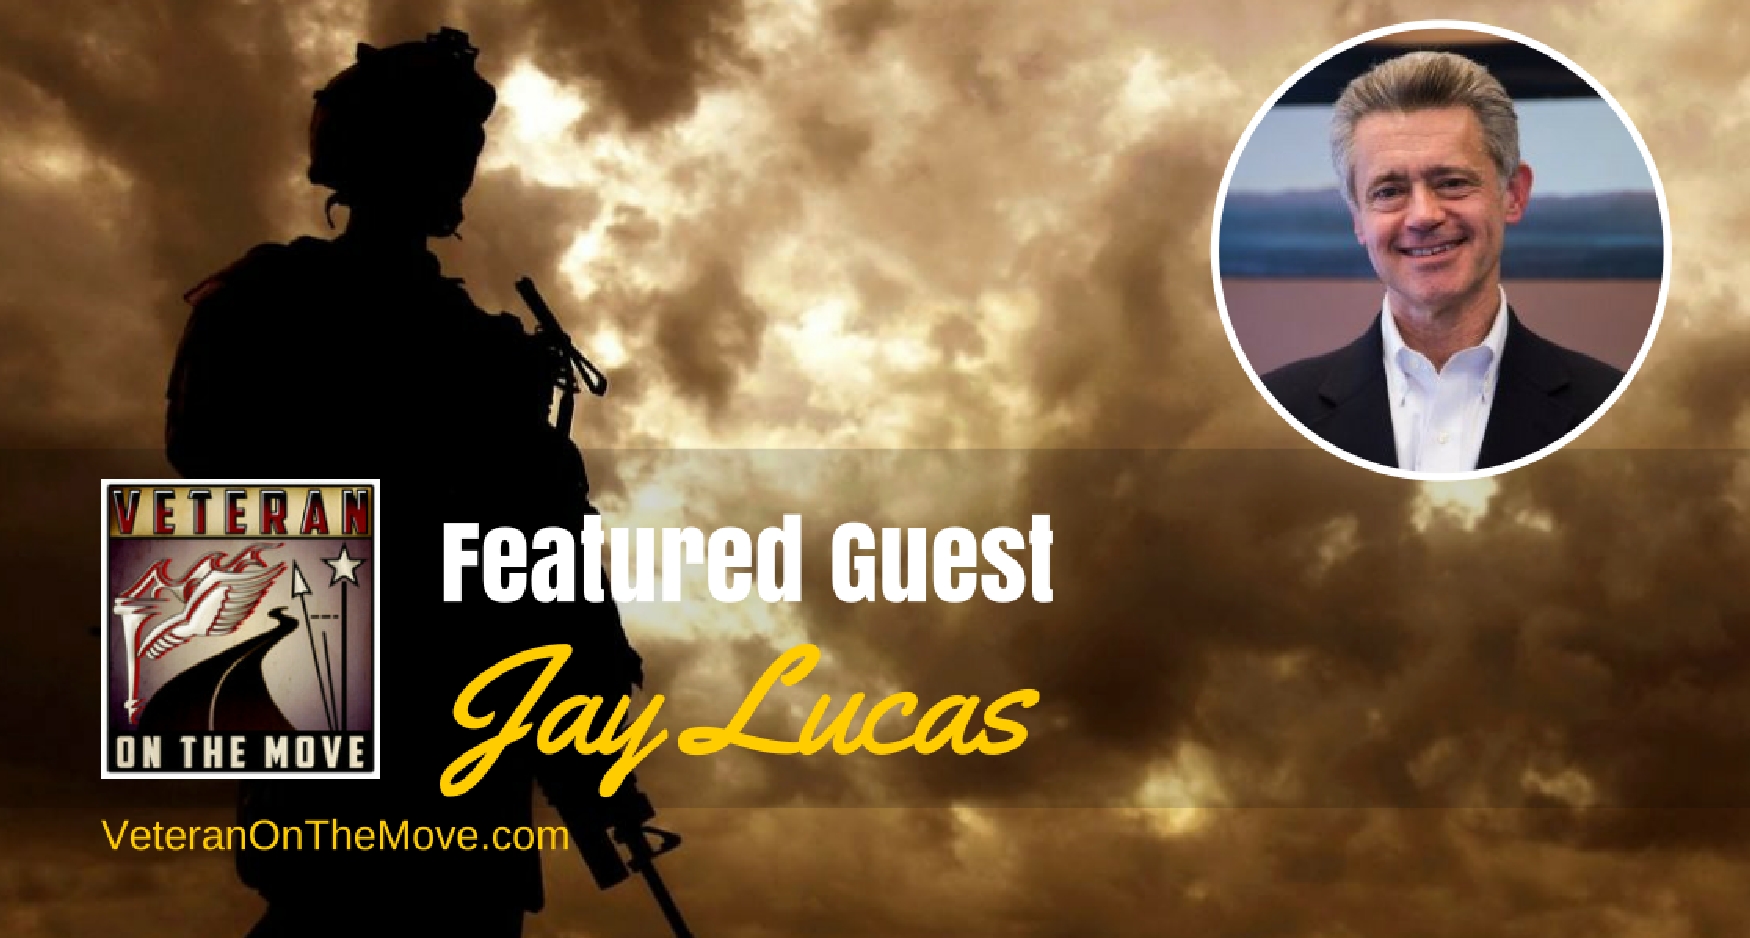 the-lucas-group-consulting-and-children-of-the-fallen-with-jay-lucas_thumbnail.png